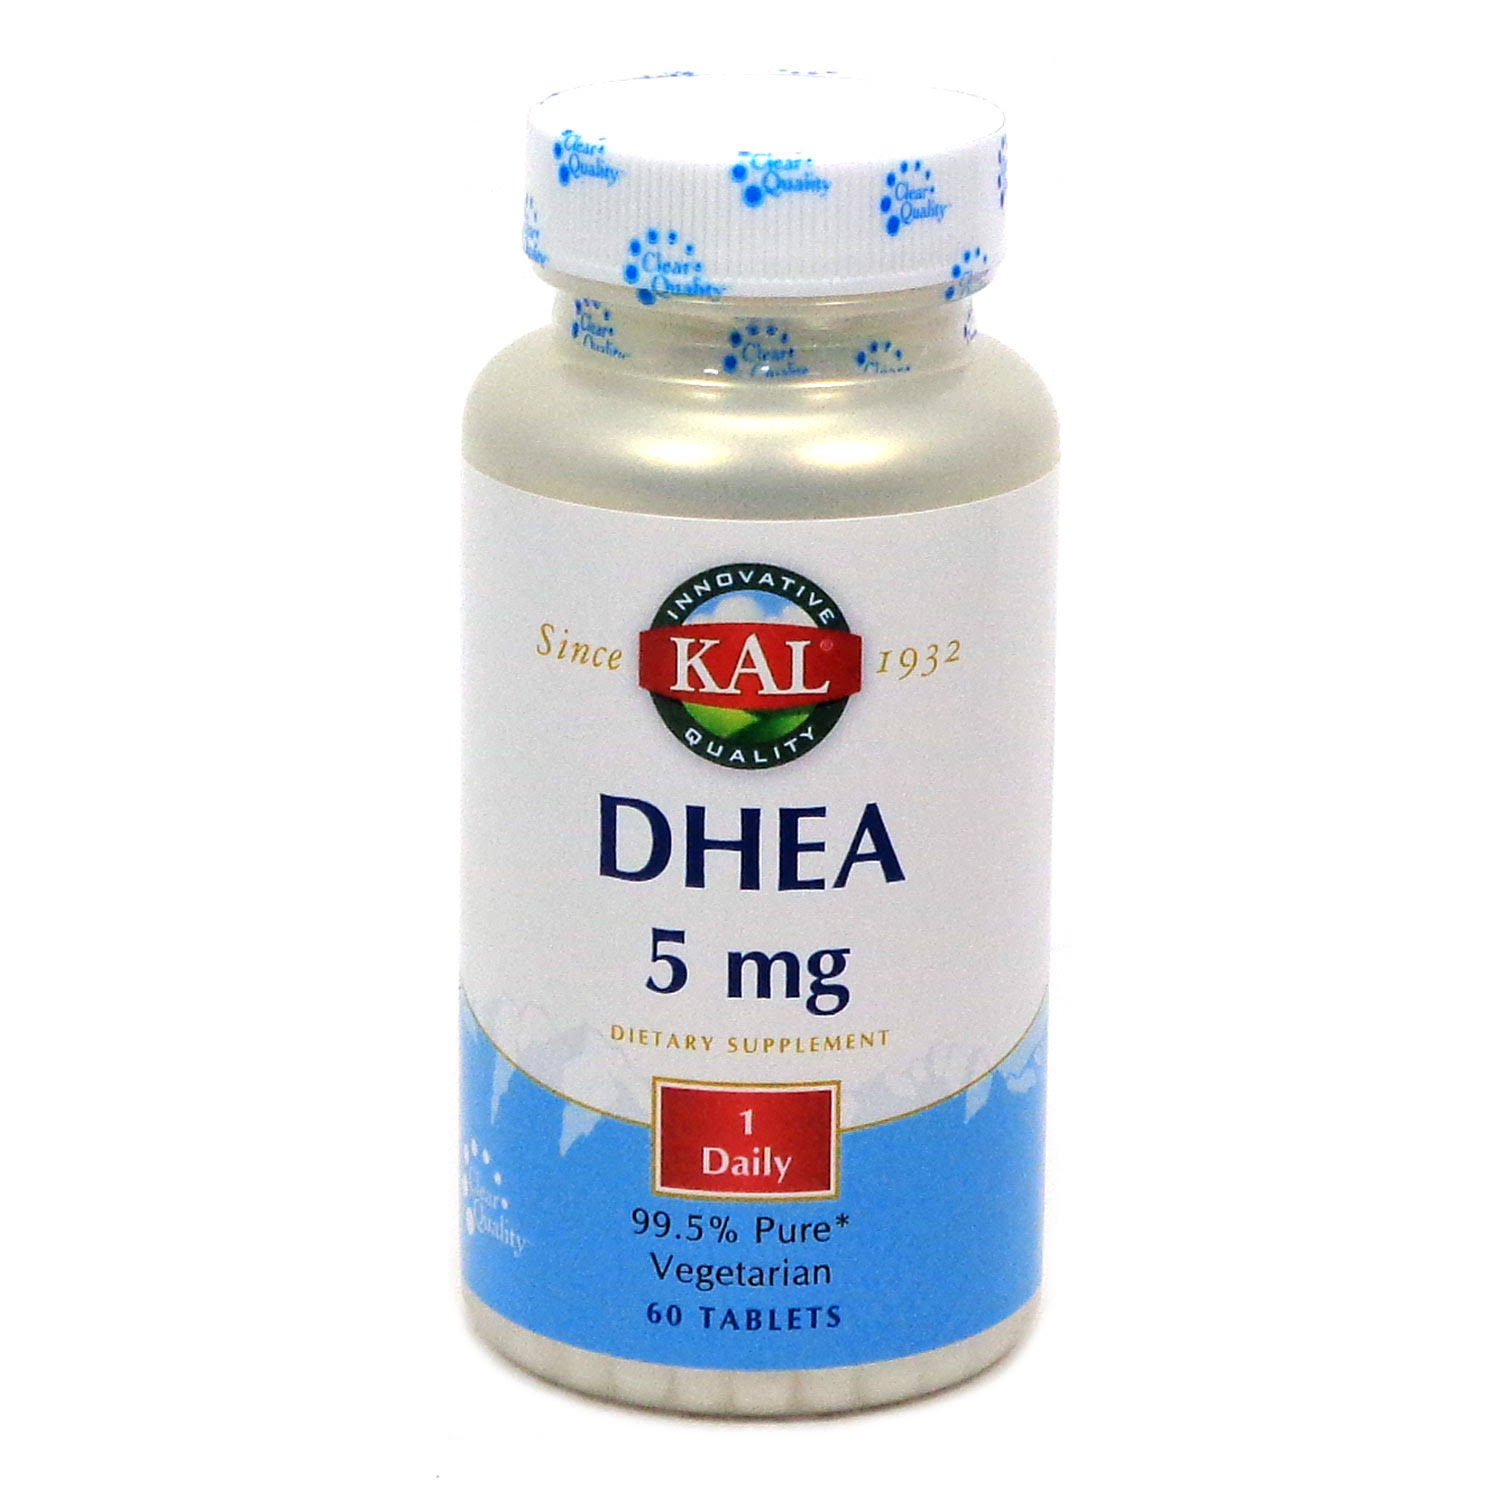 Kal Dhea-5 Dietary Supplement - 5mg, 60 Tablets